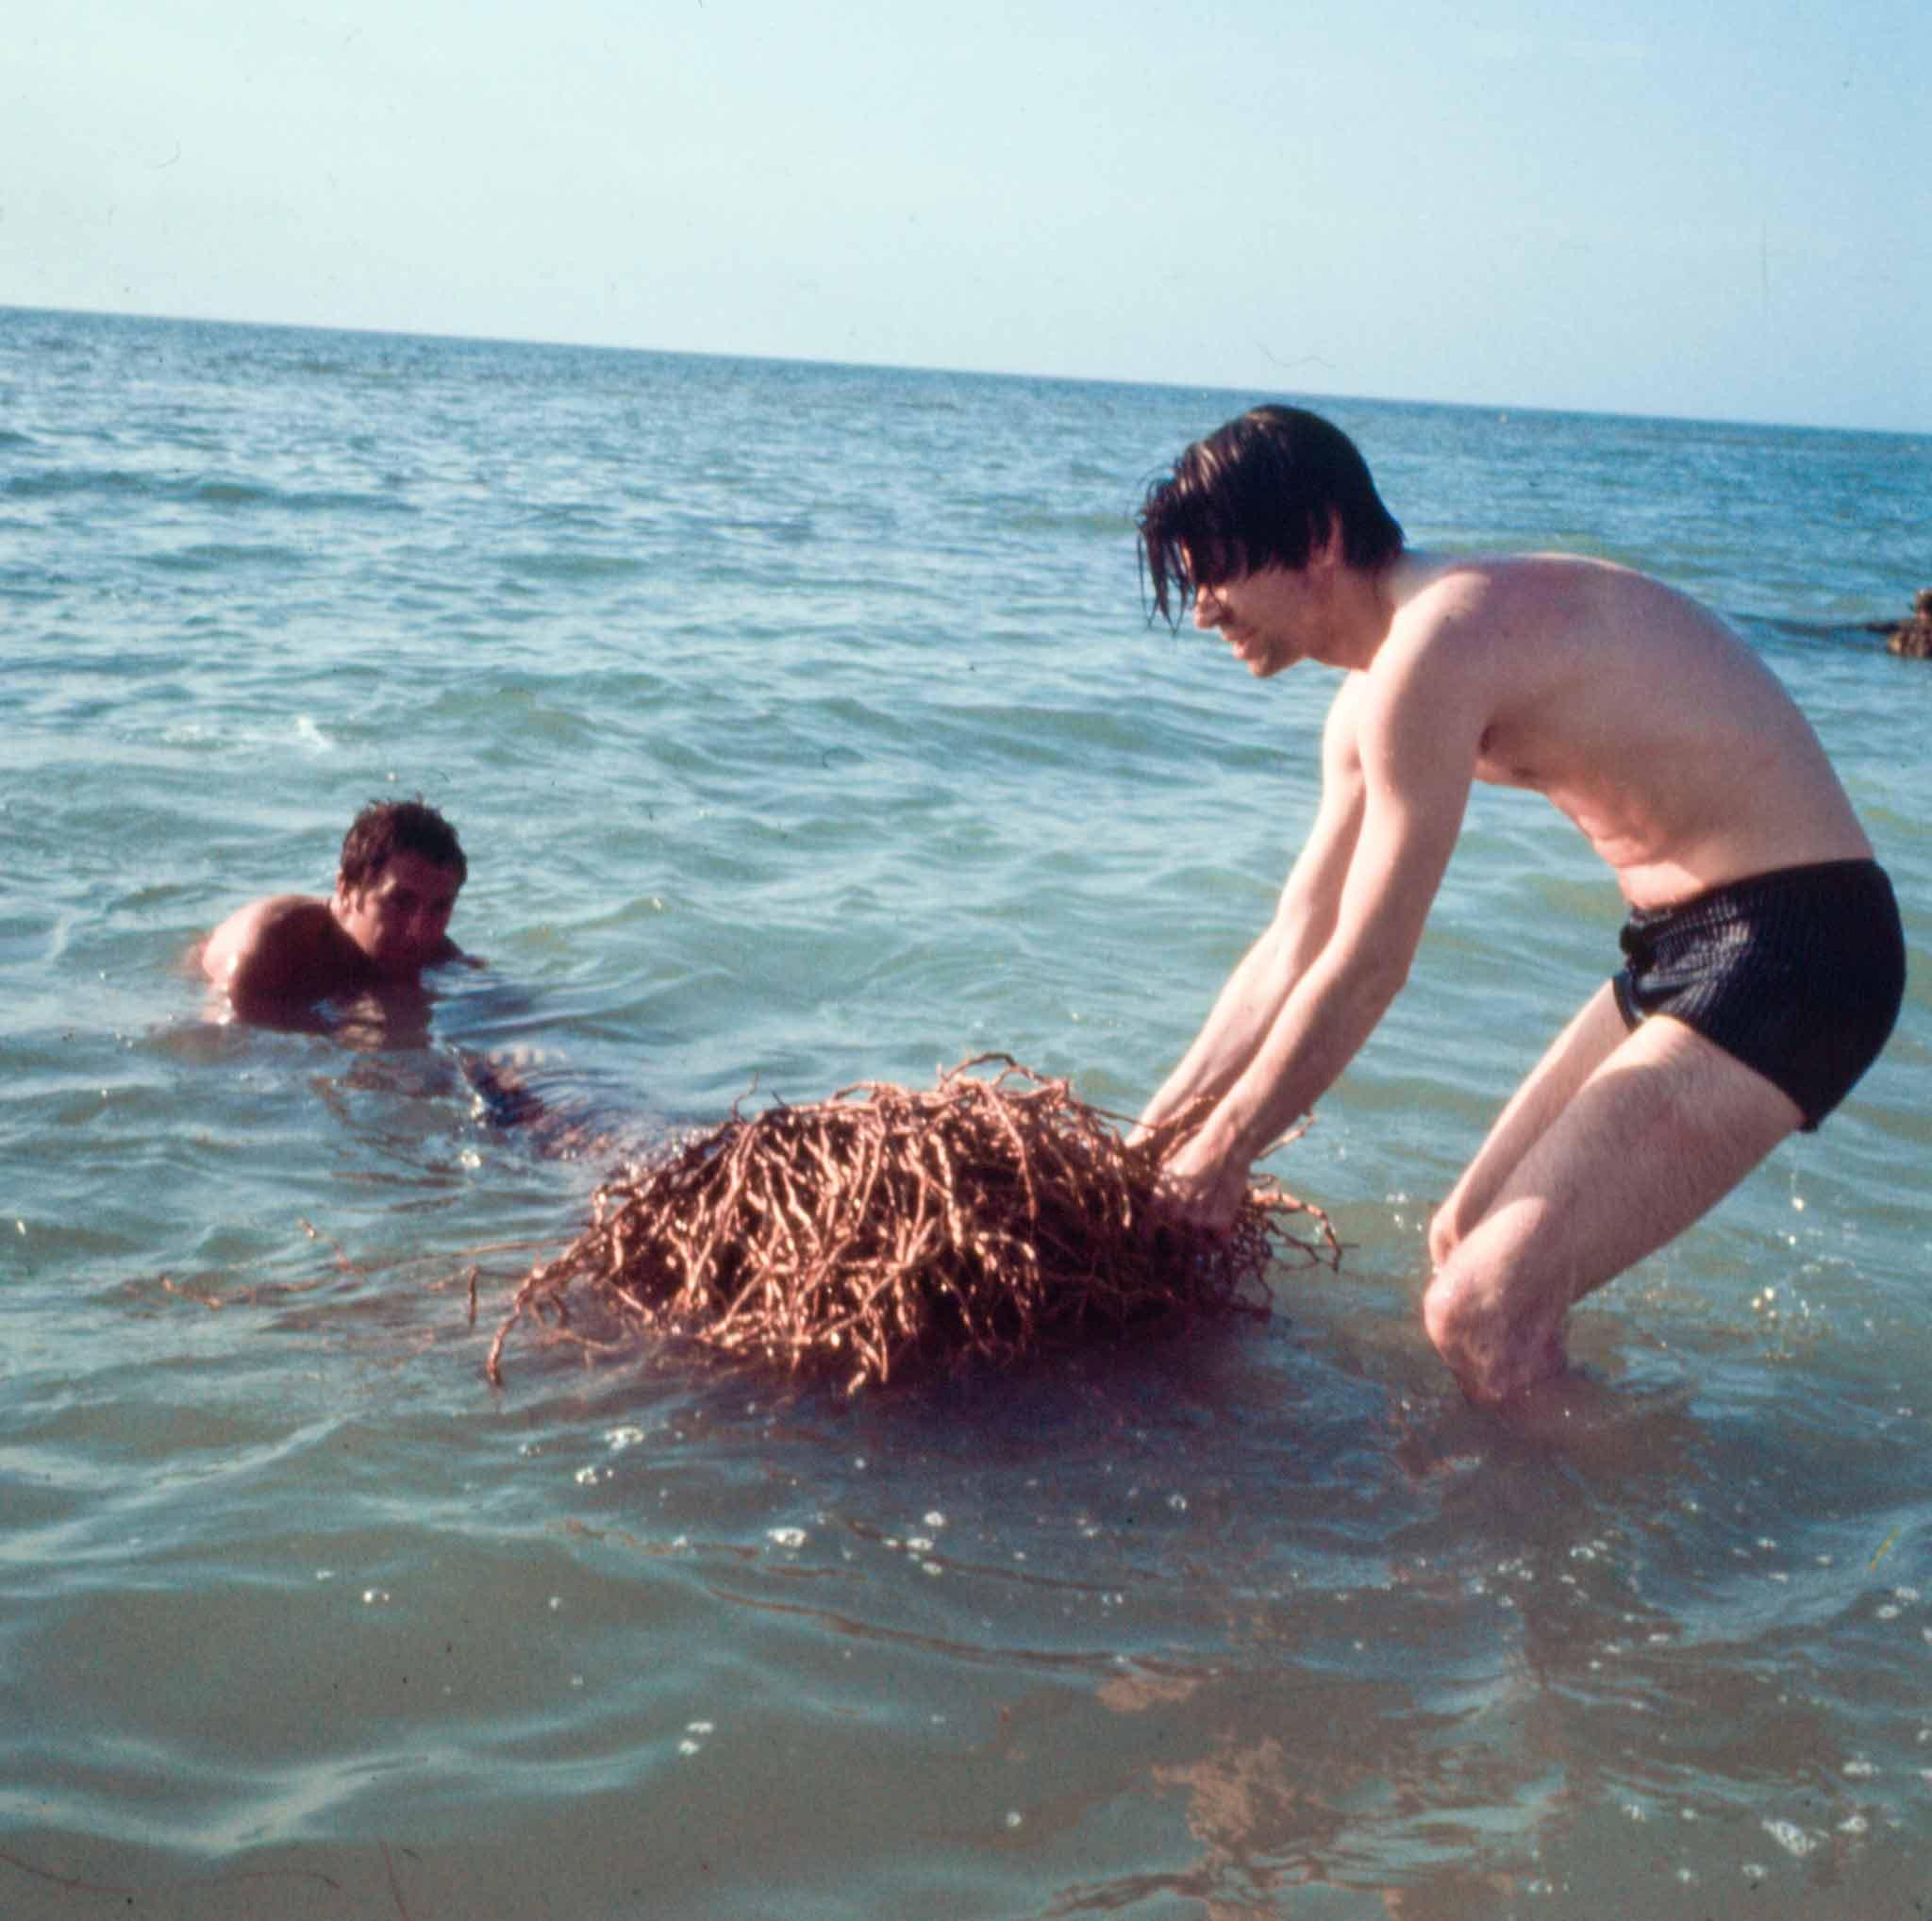 Robert Smithson with Robert Rauschenberg taking a floating, waterlogged tree out of the ocean off Captiva Island in Florida. This tree, which includes the root system, will become Smithson's first Upside Down Tree work.. 